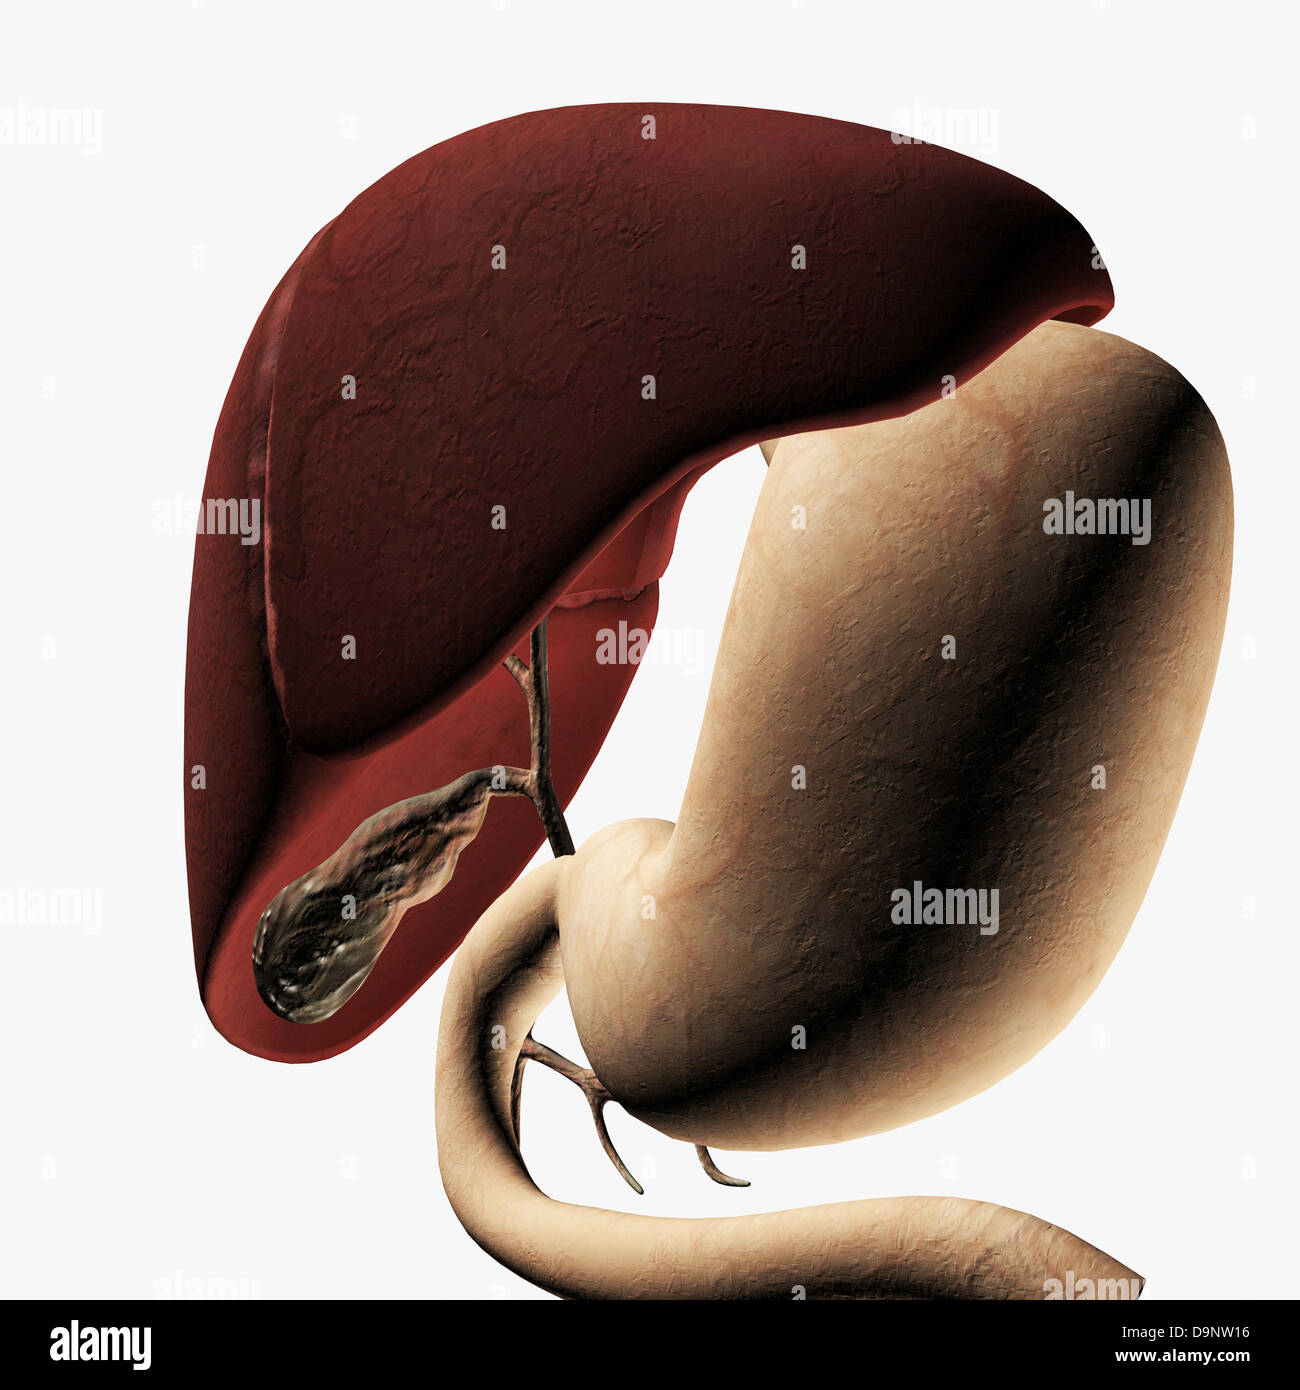 Medical illustration of the liver and stomach, three dimensional view. Stock Photo